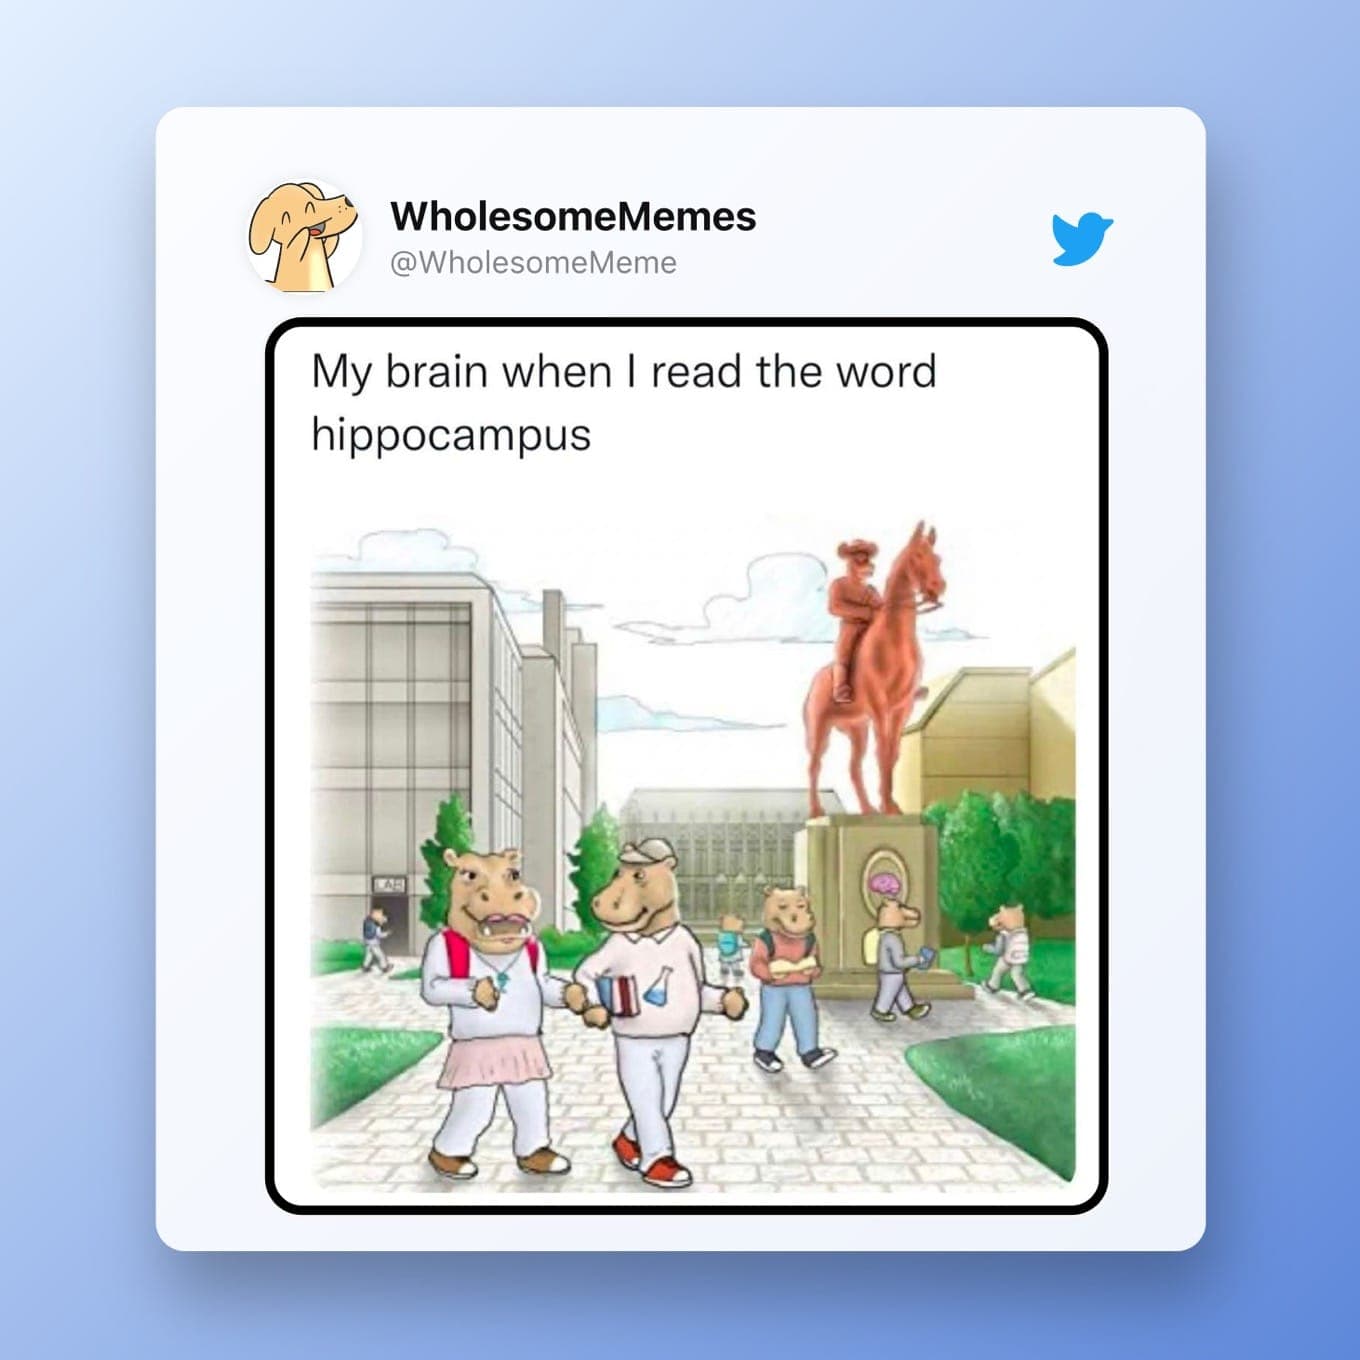 Wholesome Meme: My brain when I read the word hippocampus [Hippos on a college campus]